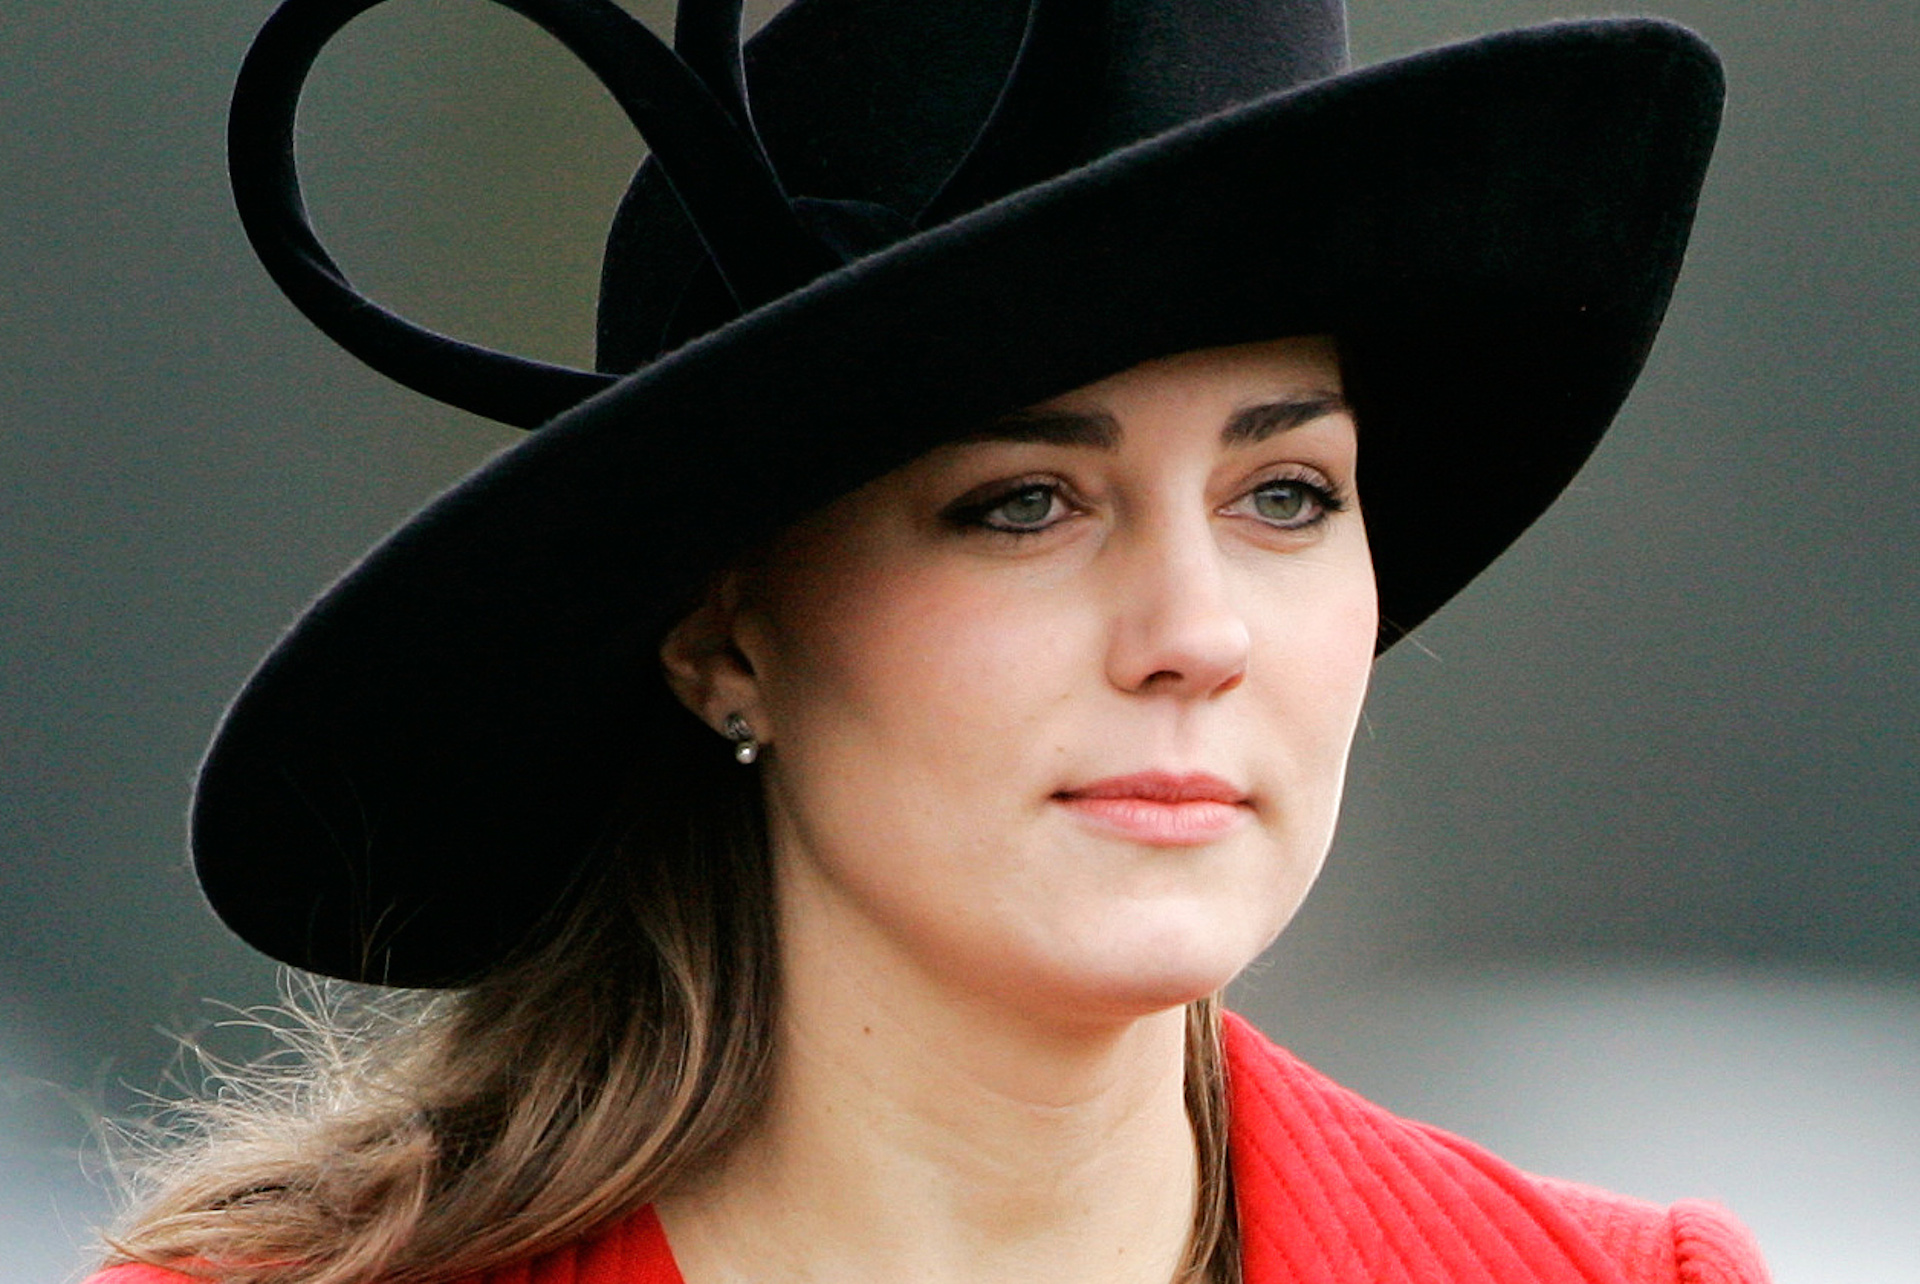 Kate Middleton: “I was only 9 years old…”